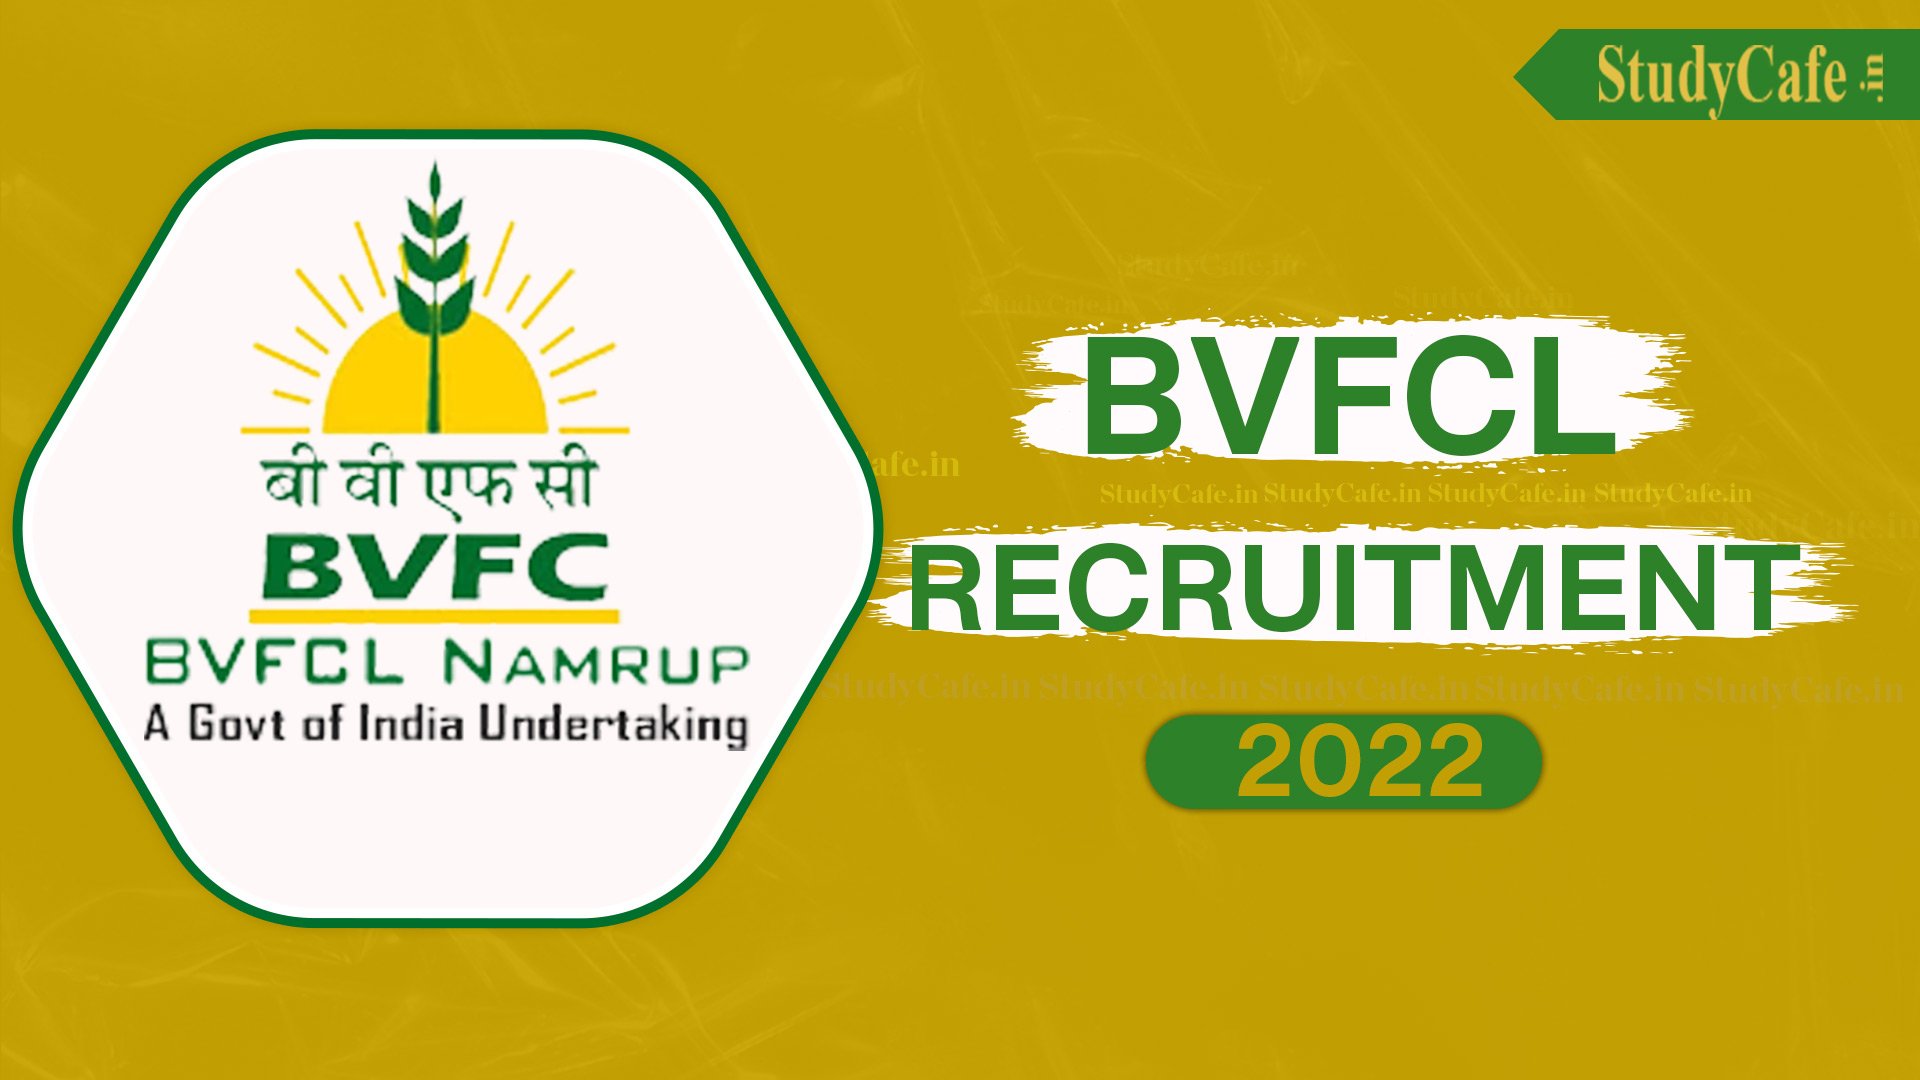 BVFCL Asstt. Medical Superintendent Recruitment 2022: Check Salary, Qualification, and How to Apply